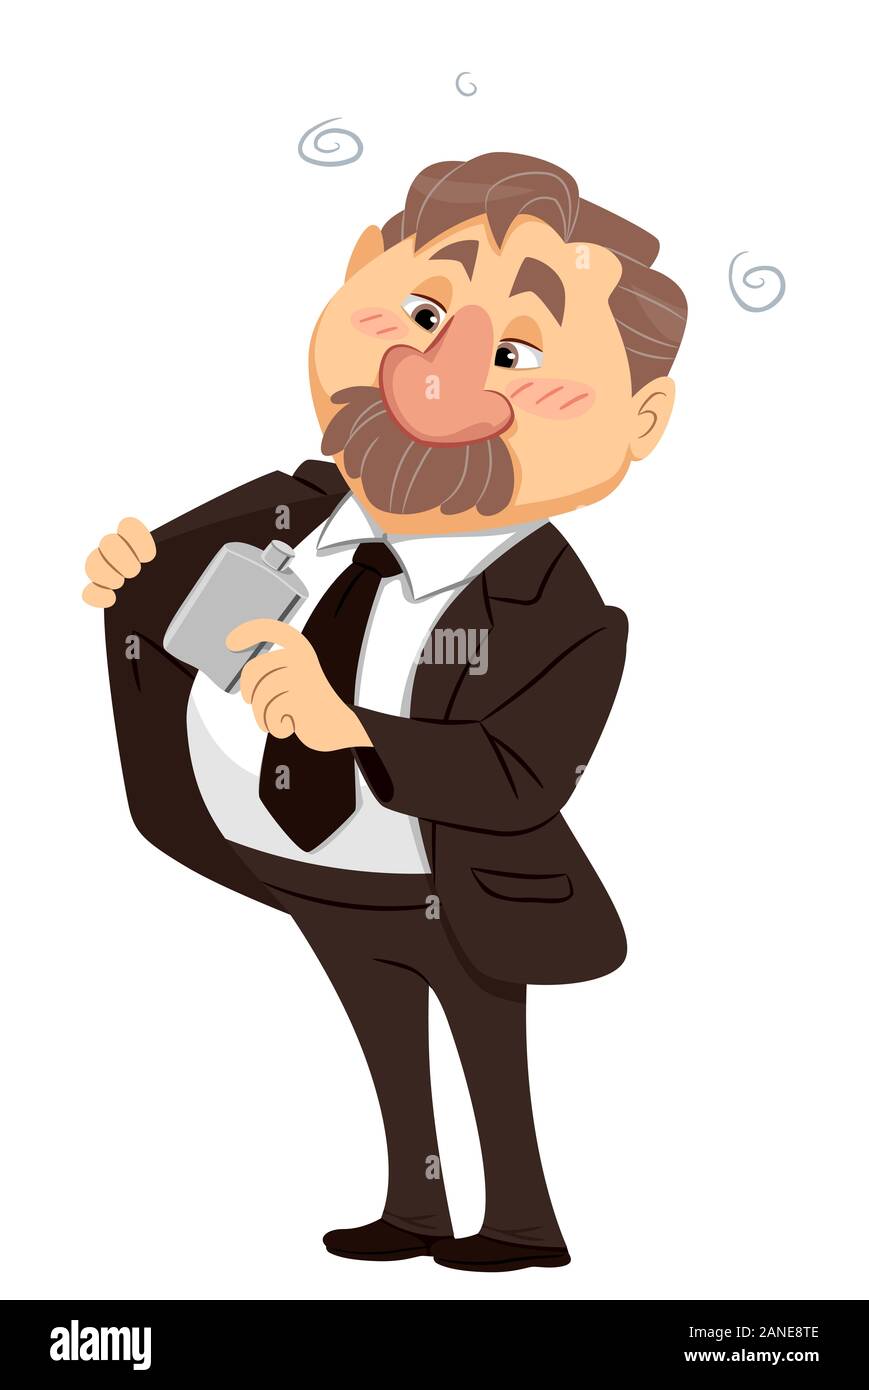 Illustration of an Alcoholic and Drunk Man Wearing Business Attire and Putting His Hip Flask in His Pocket Stock Photo